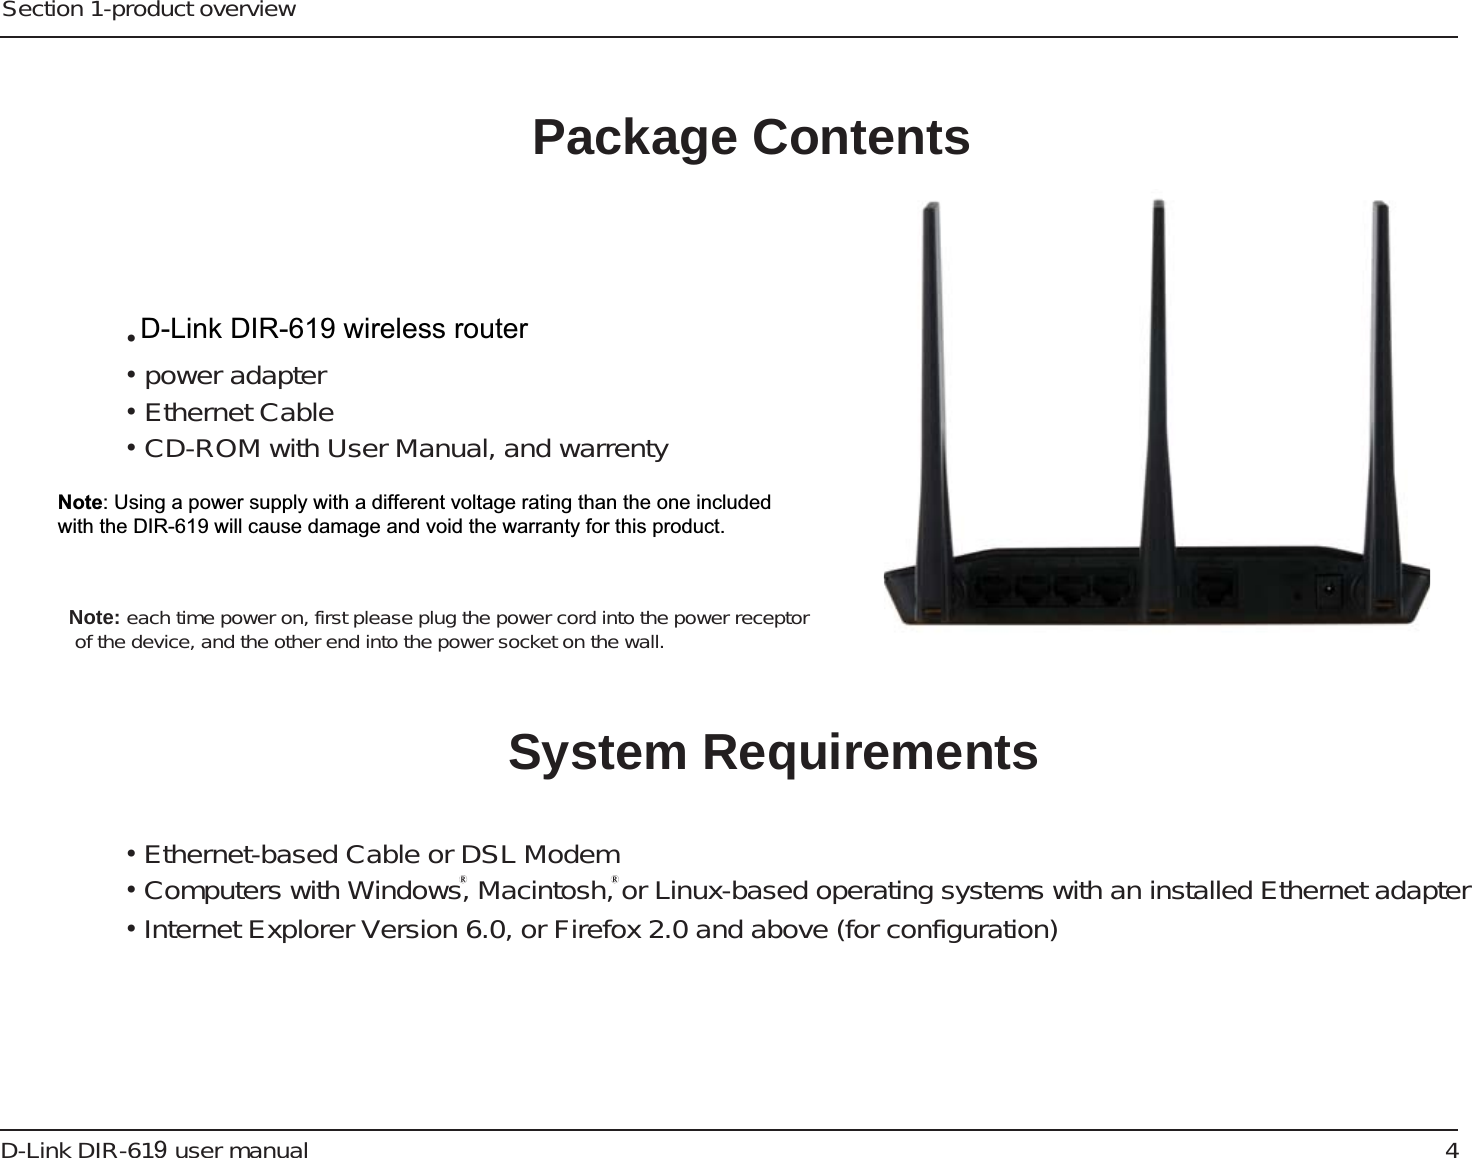 4D-Link DIR-61 user manualSection 1-product overview• D-Link DIR-61　wireless router• power adapter• Ethernet Cable• CD-ROM with User Manual, and warrenty•Ethernet-based Cable or DSL ModemSystem Requirements•Computers with Windows, Macintosh, or Linux-based operating systems with an installed Ethernet adapter嘐Package Contents嘐• Internet Explorer Version 6.0, or Firefox 2.0 and above (for configuration)Note: Using a power supply with a different voltage rating than the one includedwith the DIR-618 will cause damage and void the warranty for this product.Note: each time power on, first please plug the power cord into the power receptor of the device, and the other end into the power socket on the wall.D-Link DIR-619 wireless routerNote: Using a power supply with a different voltage rating than the one included with the DIR-619 will cause damage and void the warranty for this product.